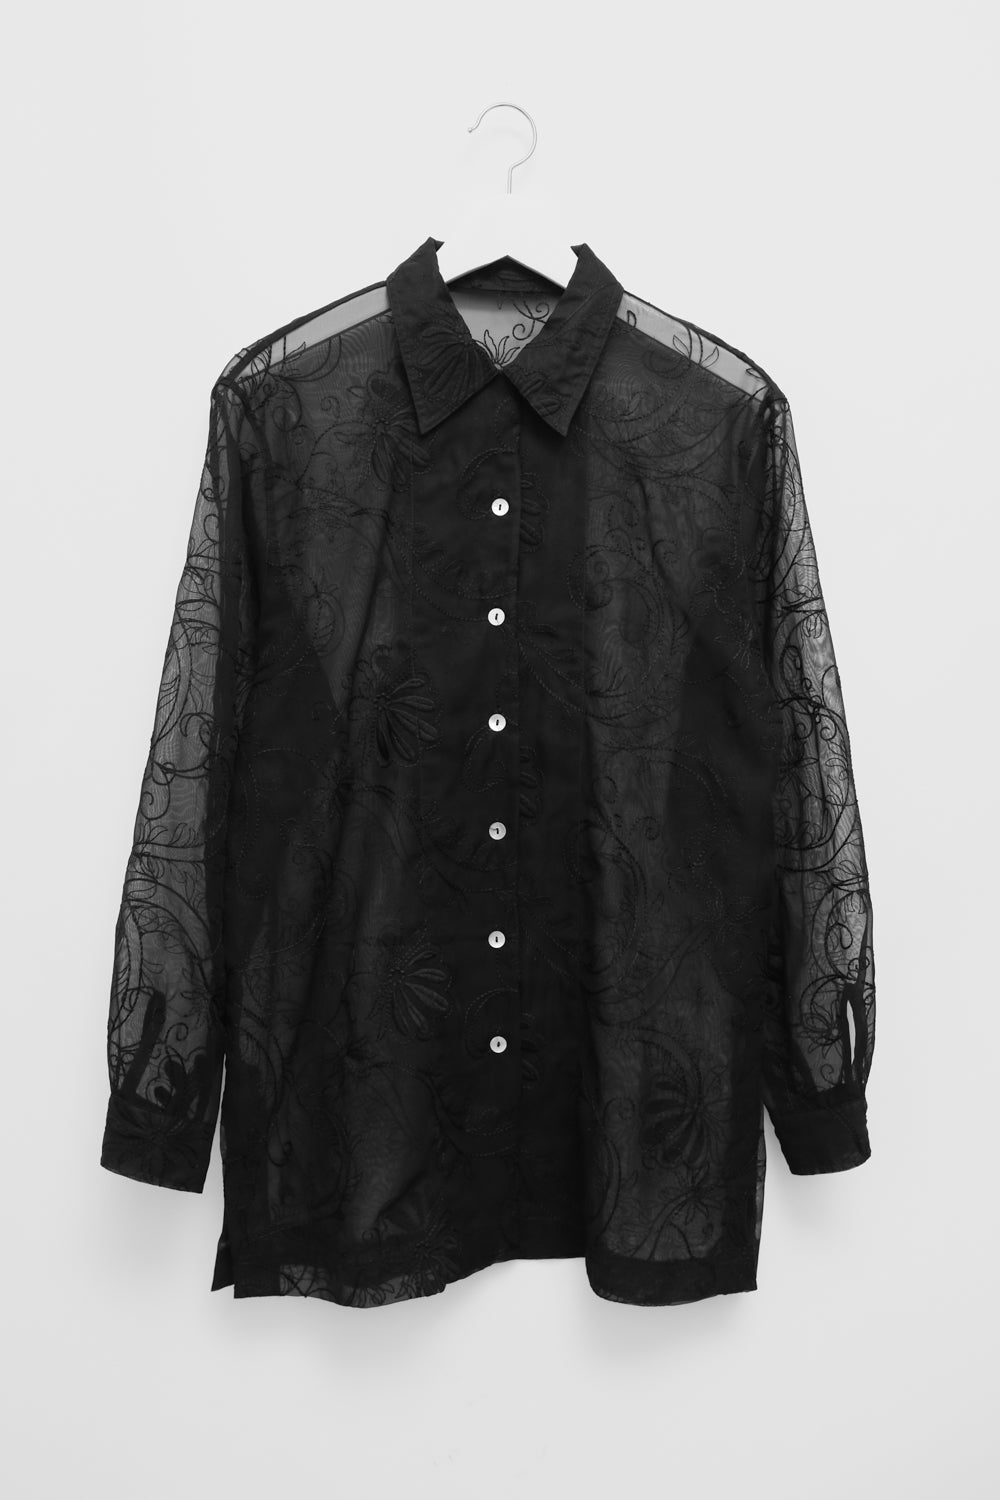 SEE THROUGH BLACK FLORAL EMBROIDERY SHIRT